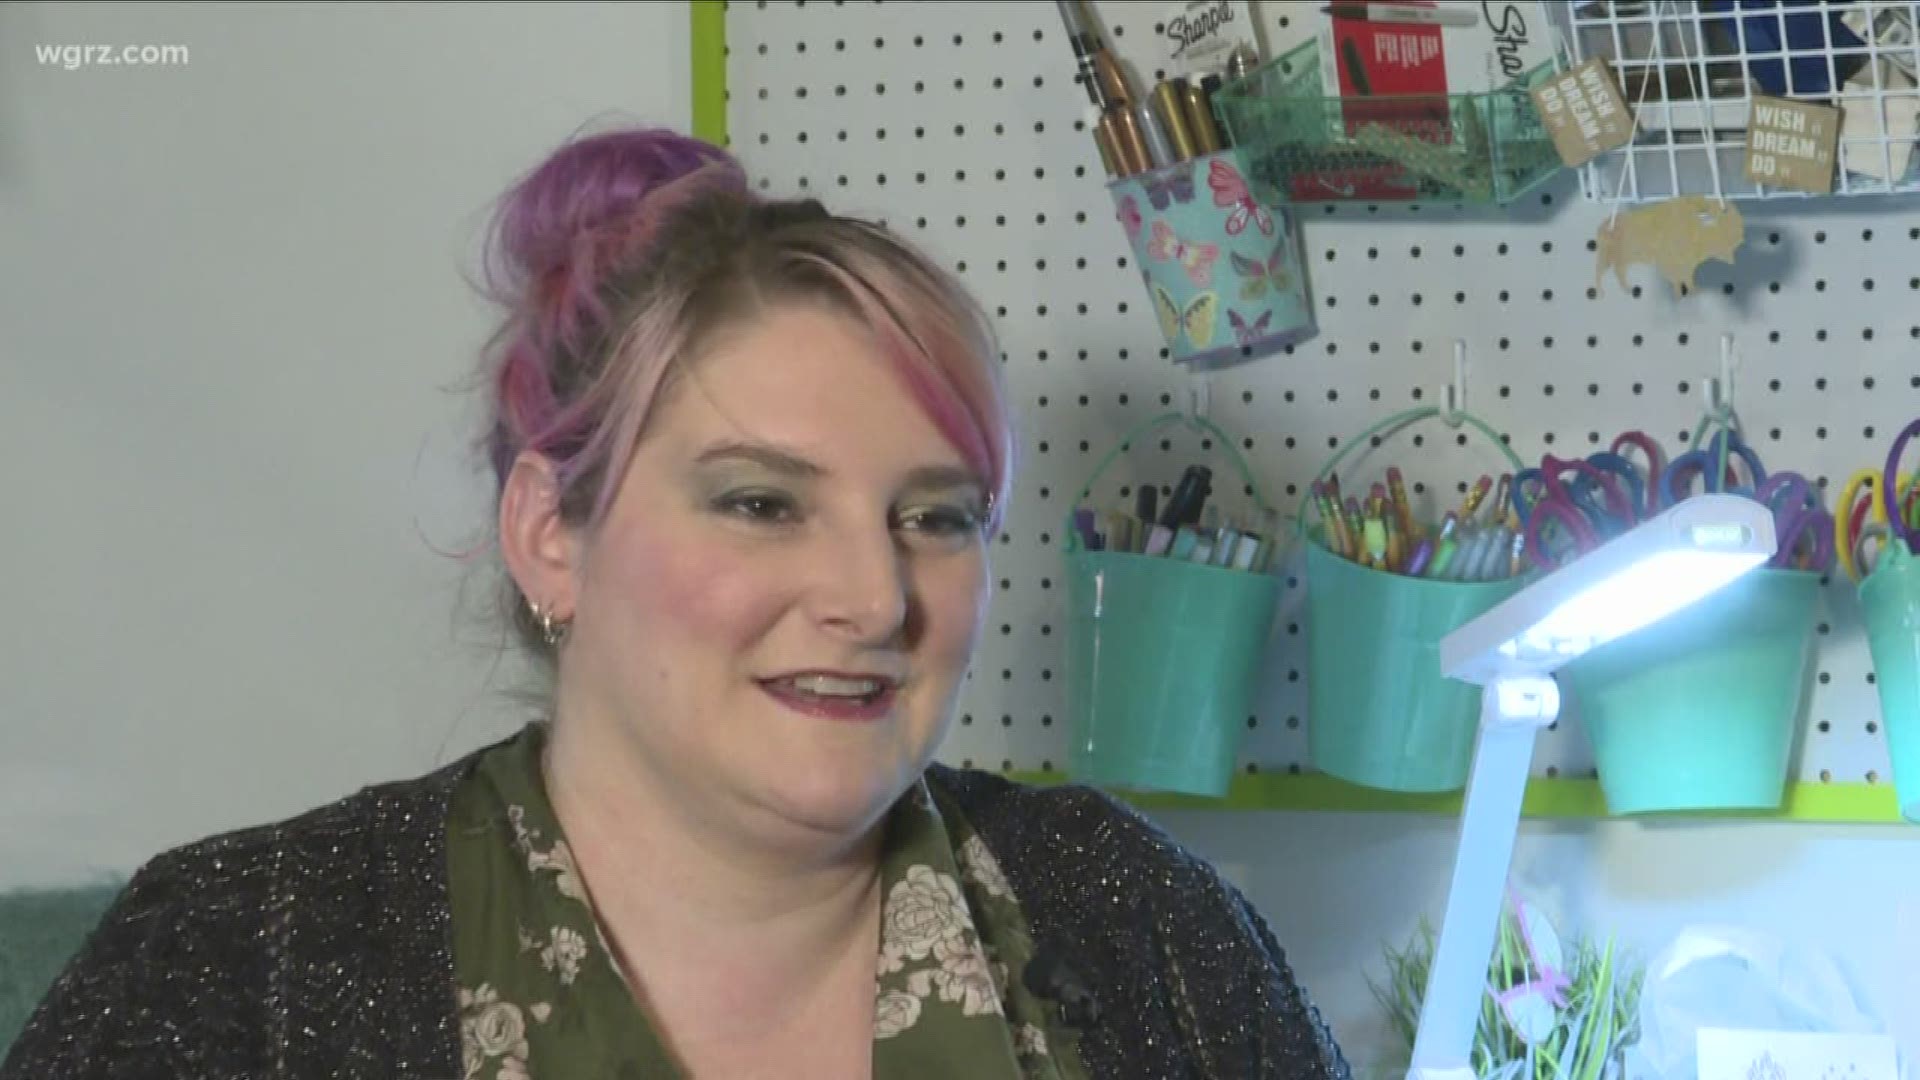 Janna Willoughby-Lohr, and I'm the owner of Papercraft Miracles, I'm originally from Buffalo and I still live here now.">